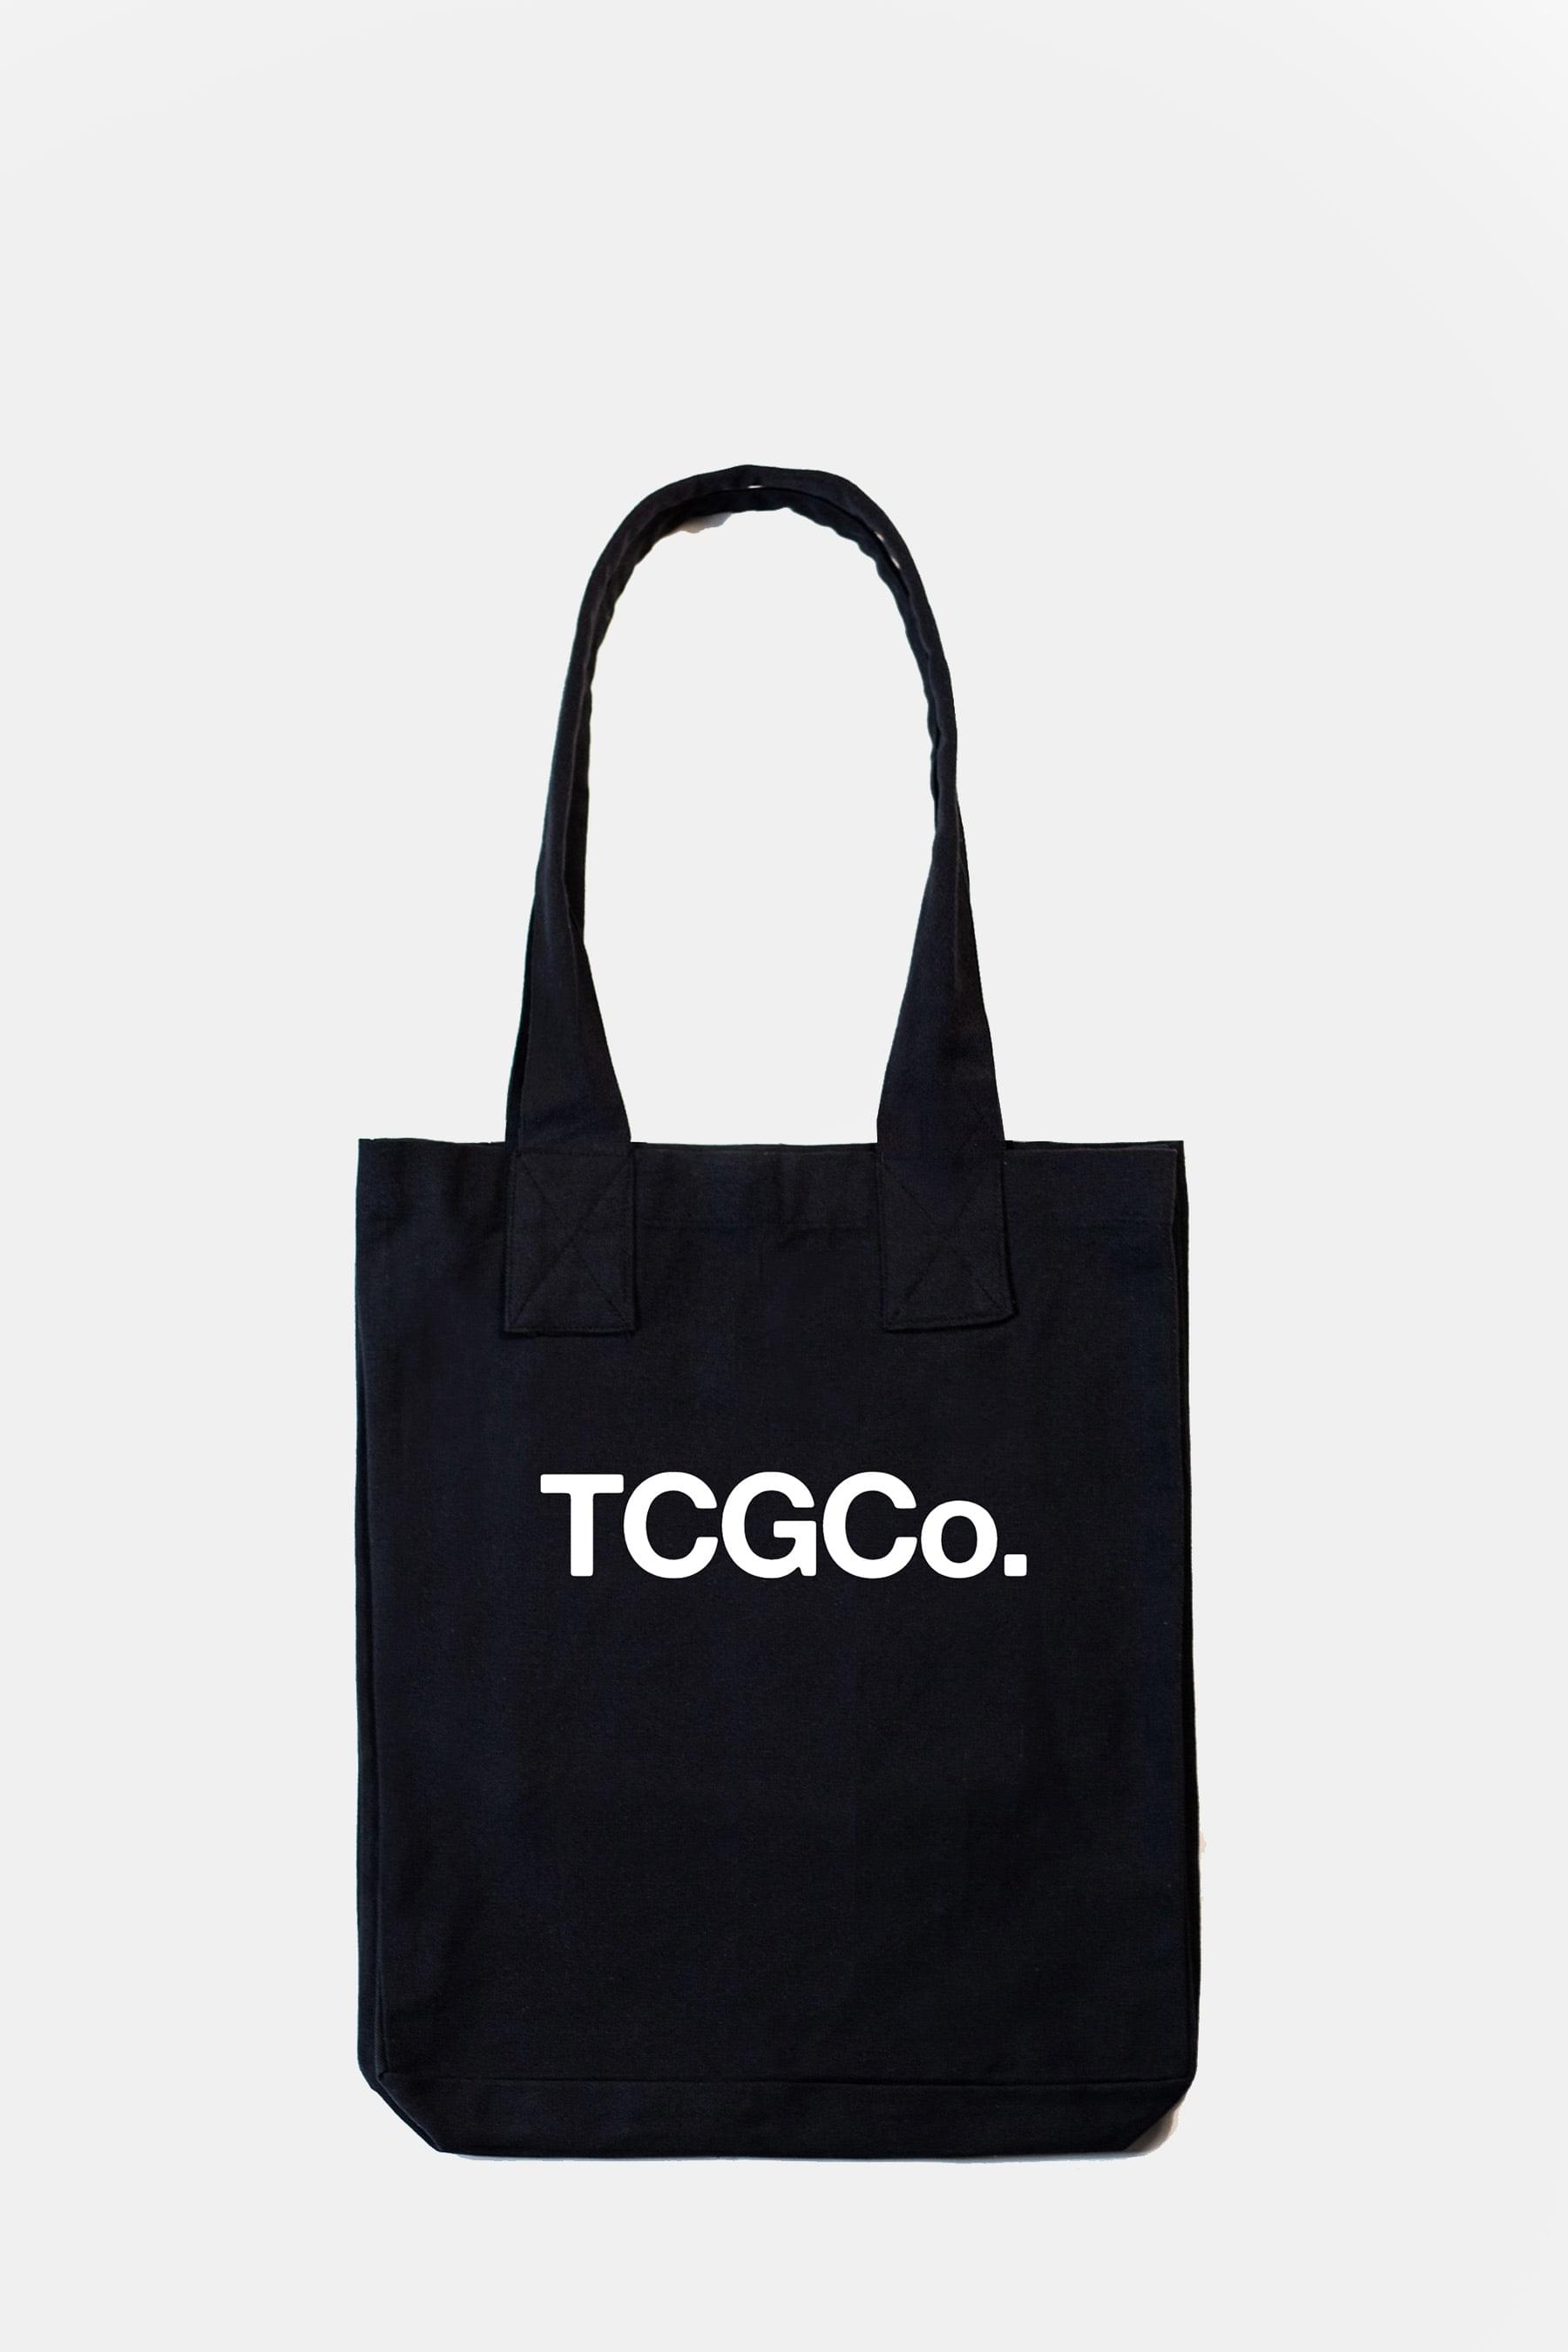 Charcoal 100% Recycled Cotton Everyday Tote - TCGCo Logo